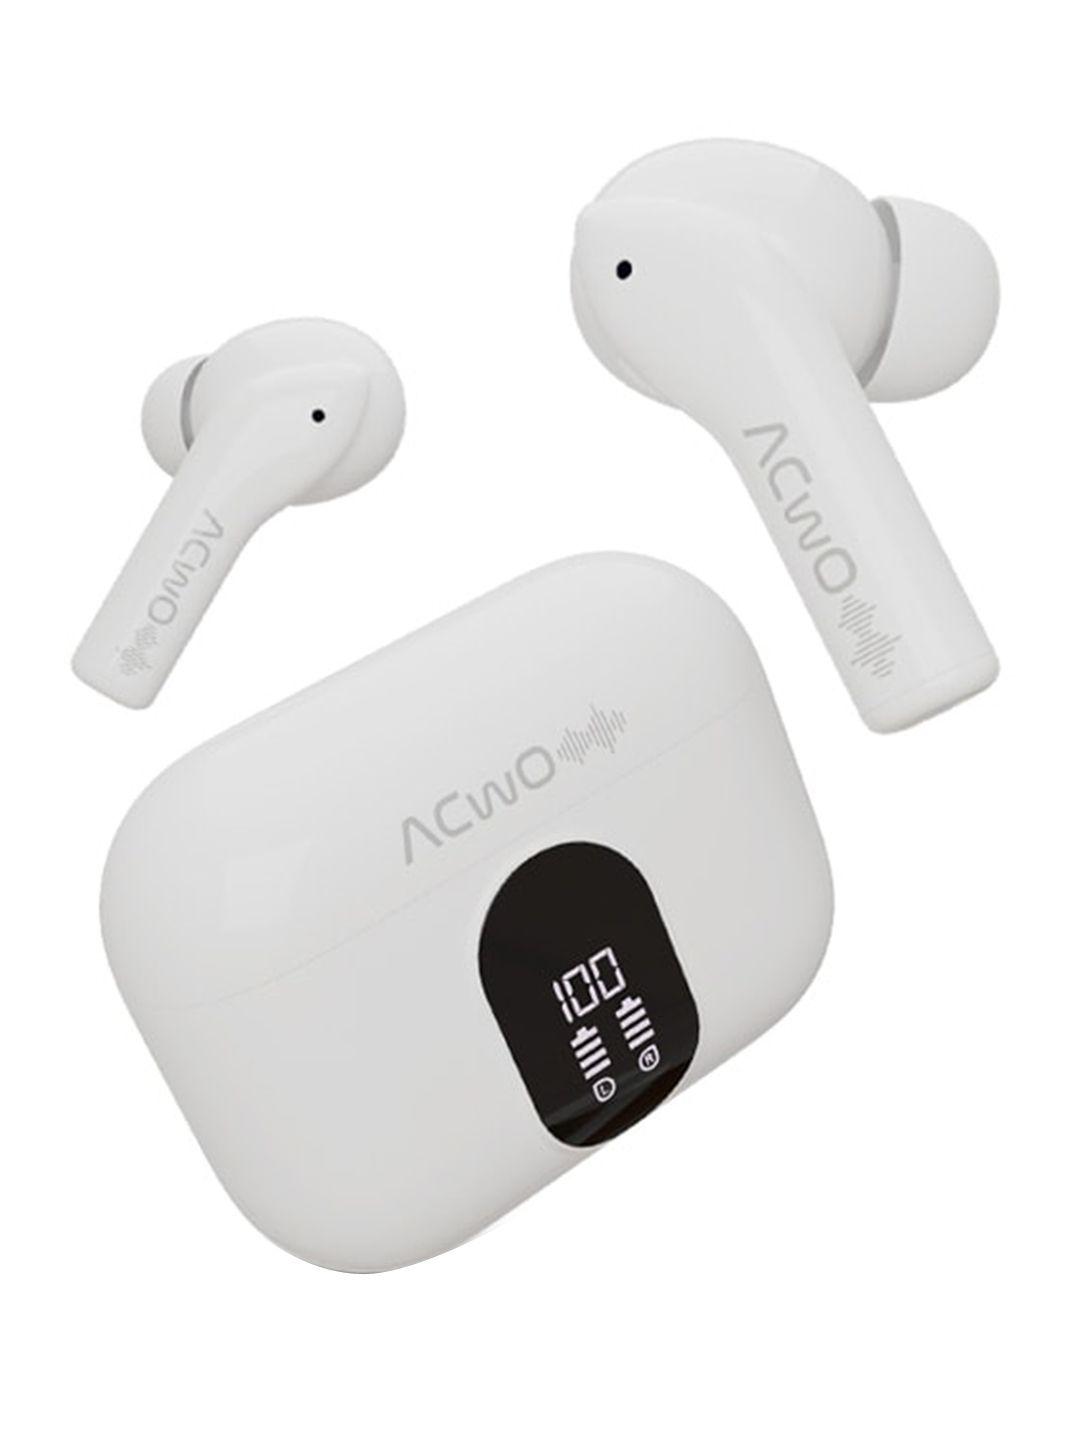 acwo dwots 545 truly wireless earbuds 48h playtime with bass & gaming mode & quad mic enc